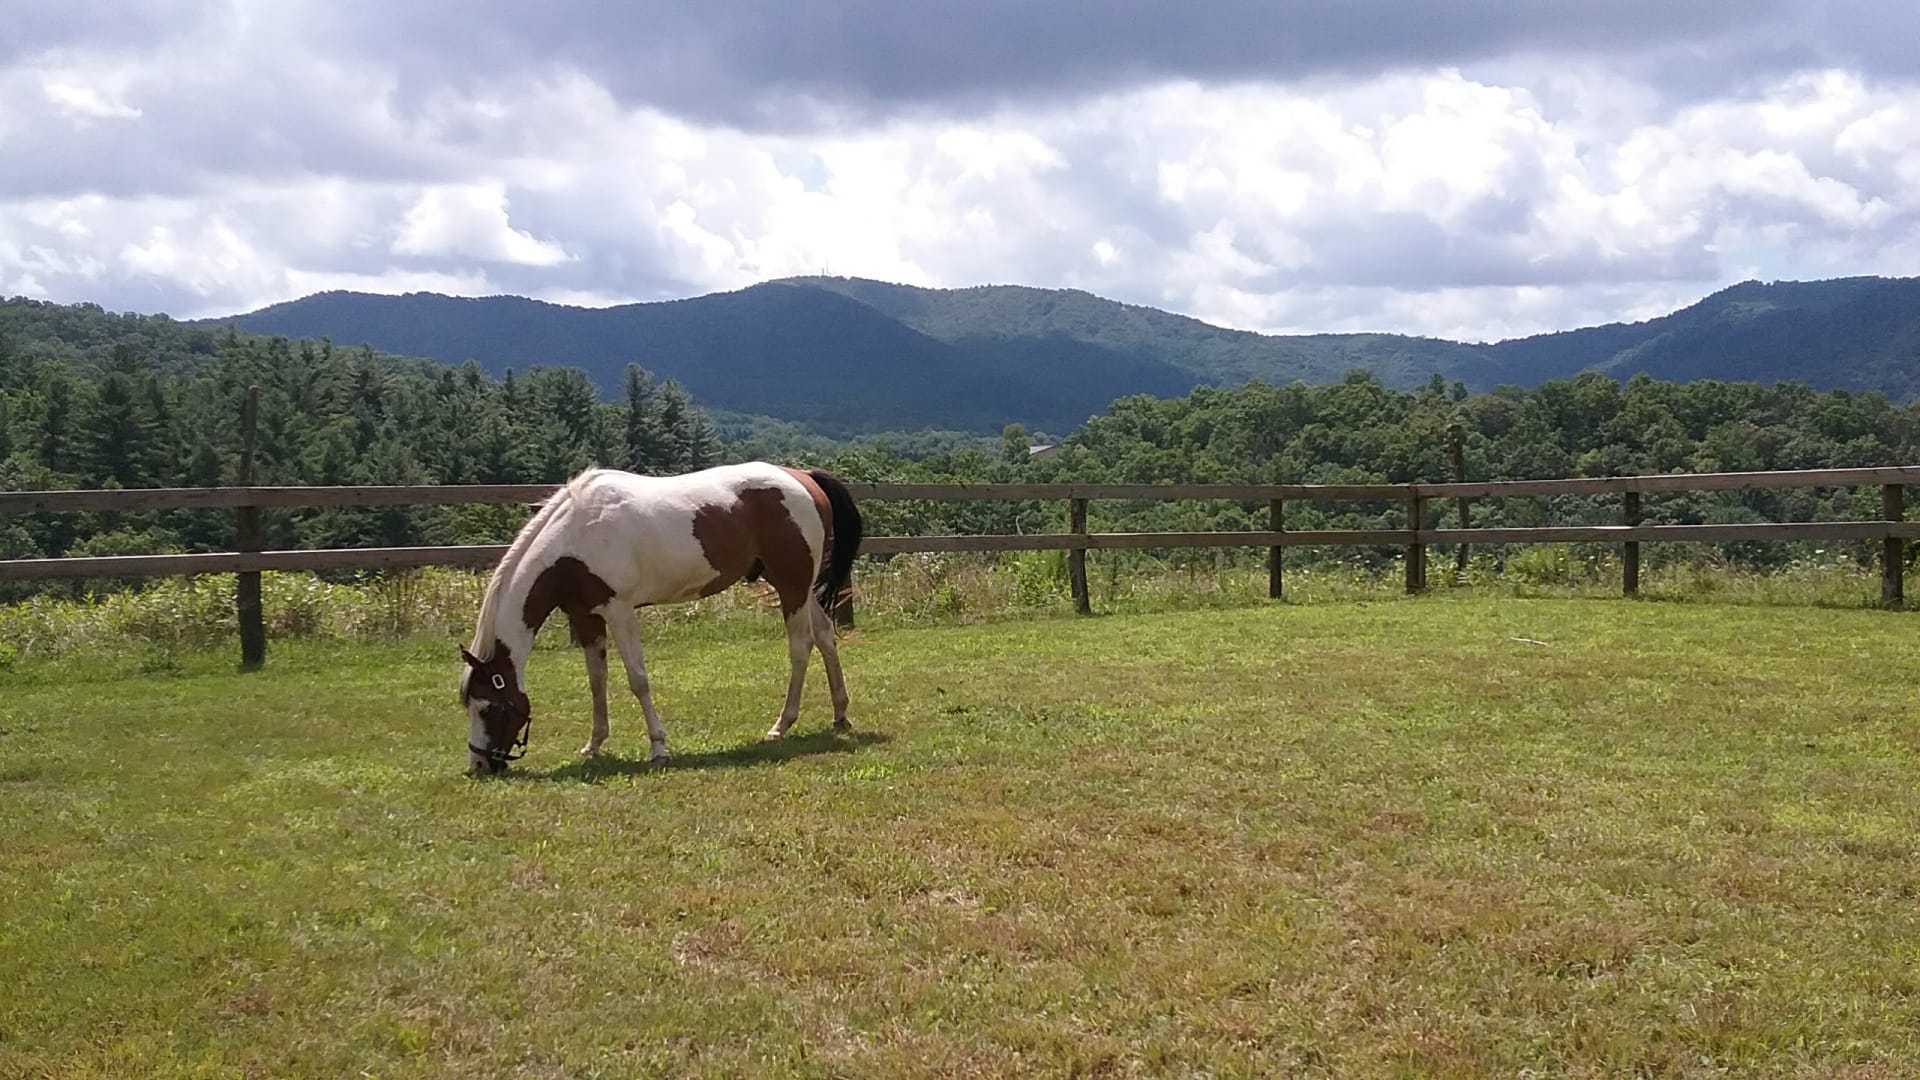 Enjoy long range mountain views from the horseback riding arena, only a 5 minute walk from the pond.